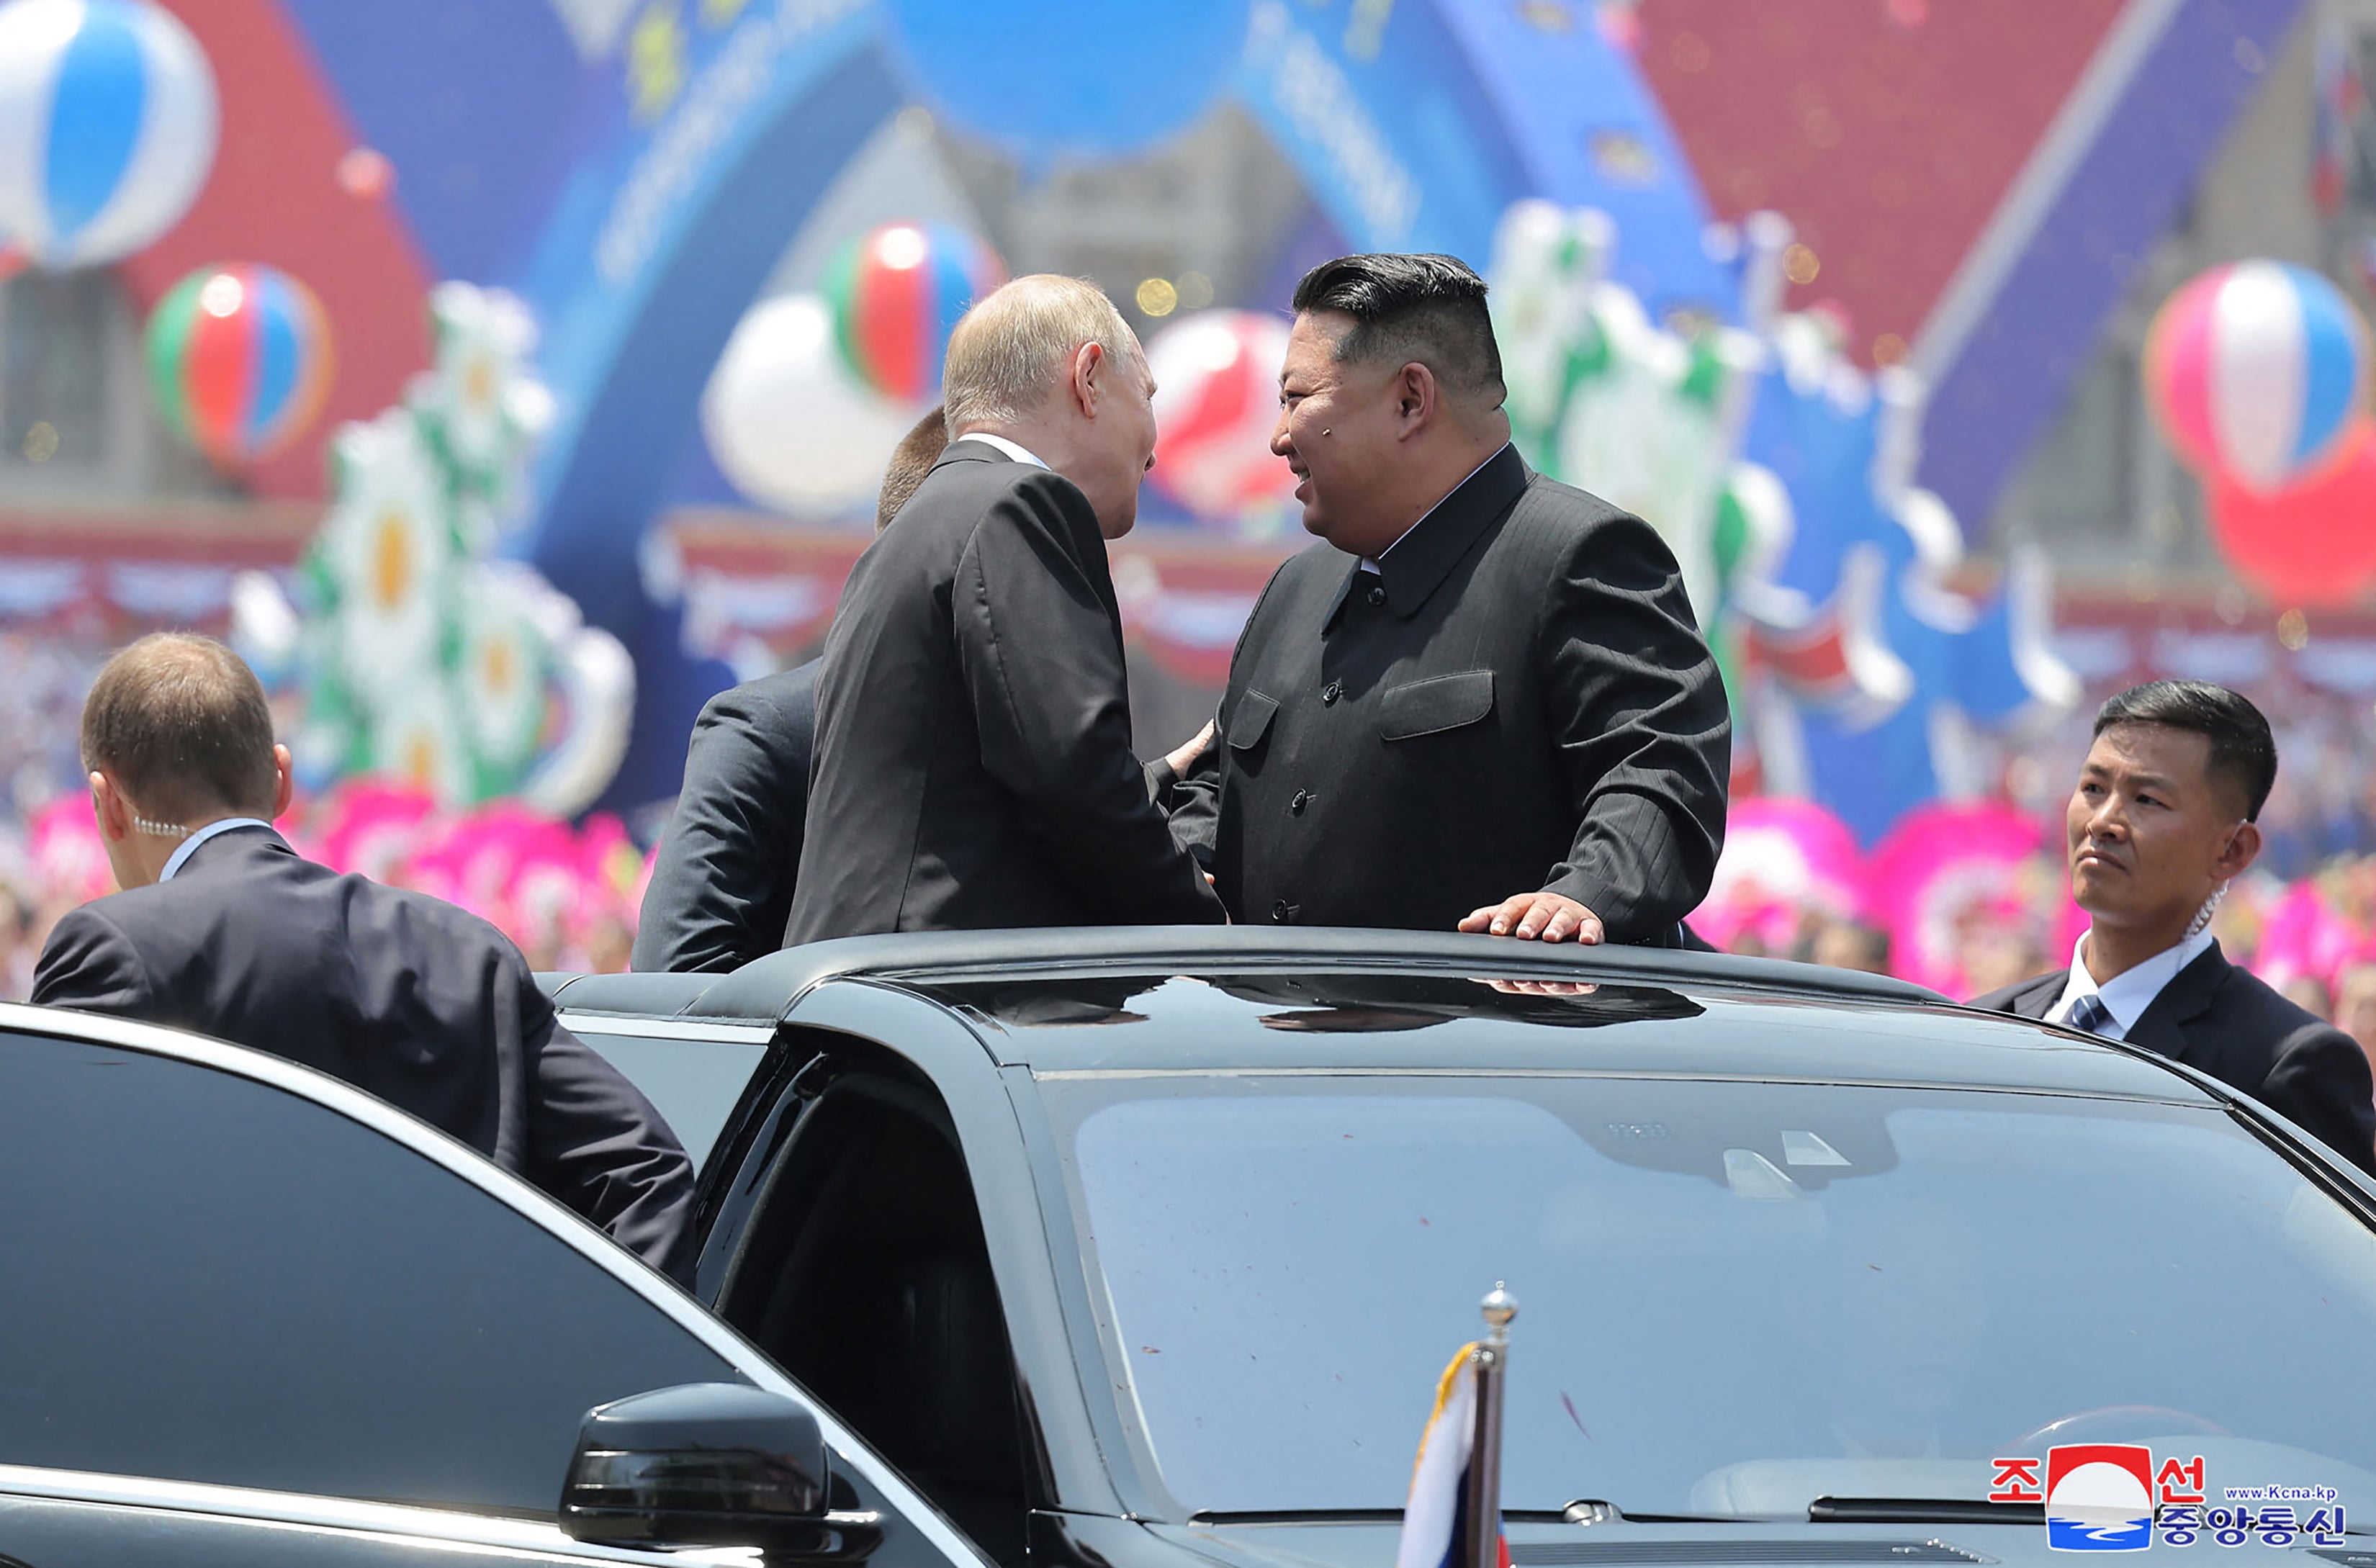 All smiles as the leaders’ fledgling friendship is on full display at a rally in Pyongyang